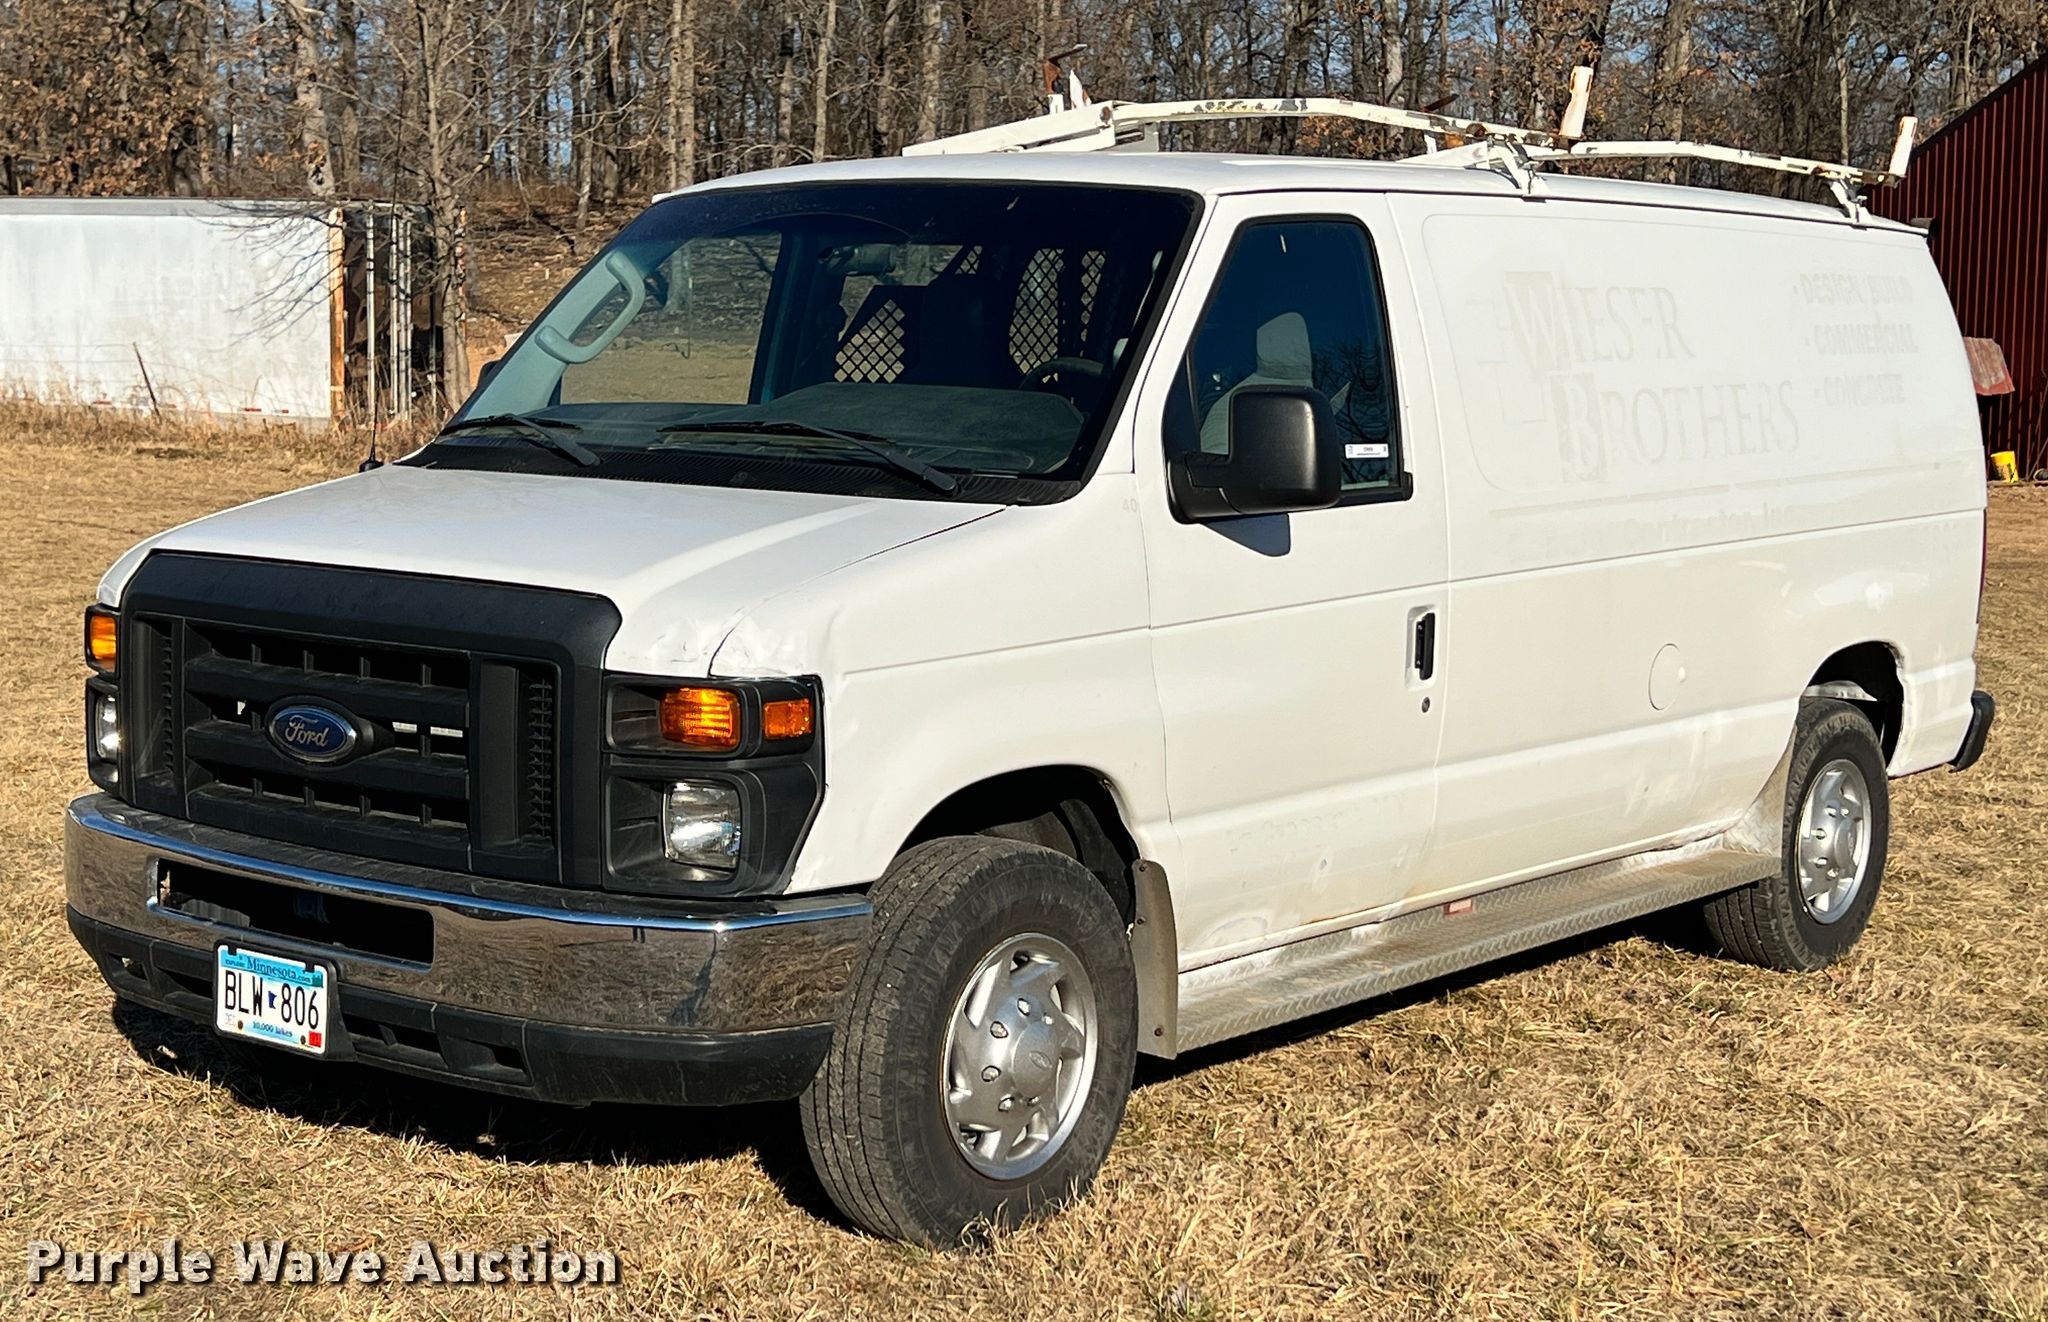 2013 Ford E250 van in Sarcoxie, MO | Item ID9685 sold | Purple Wave